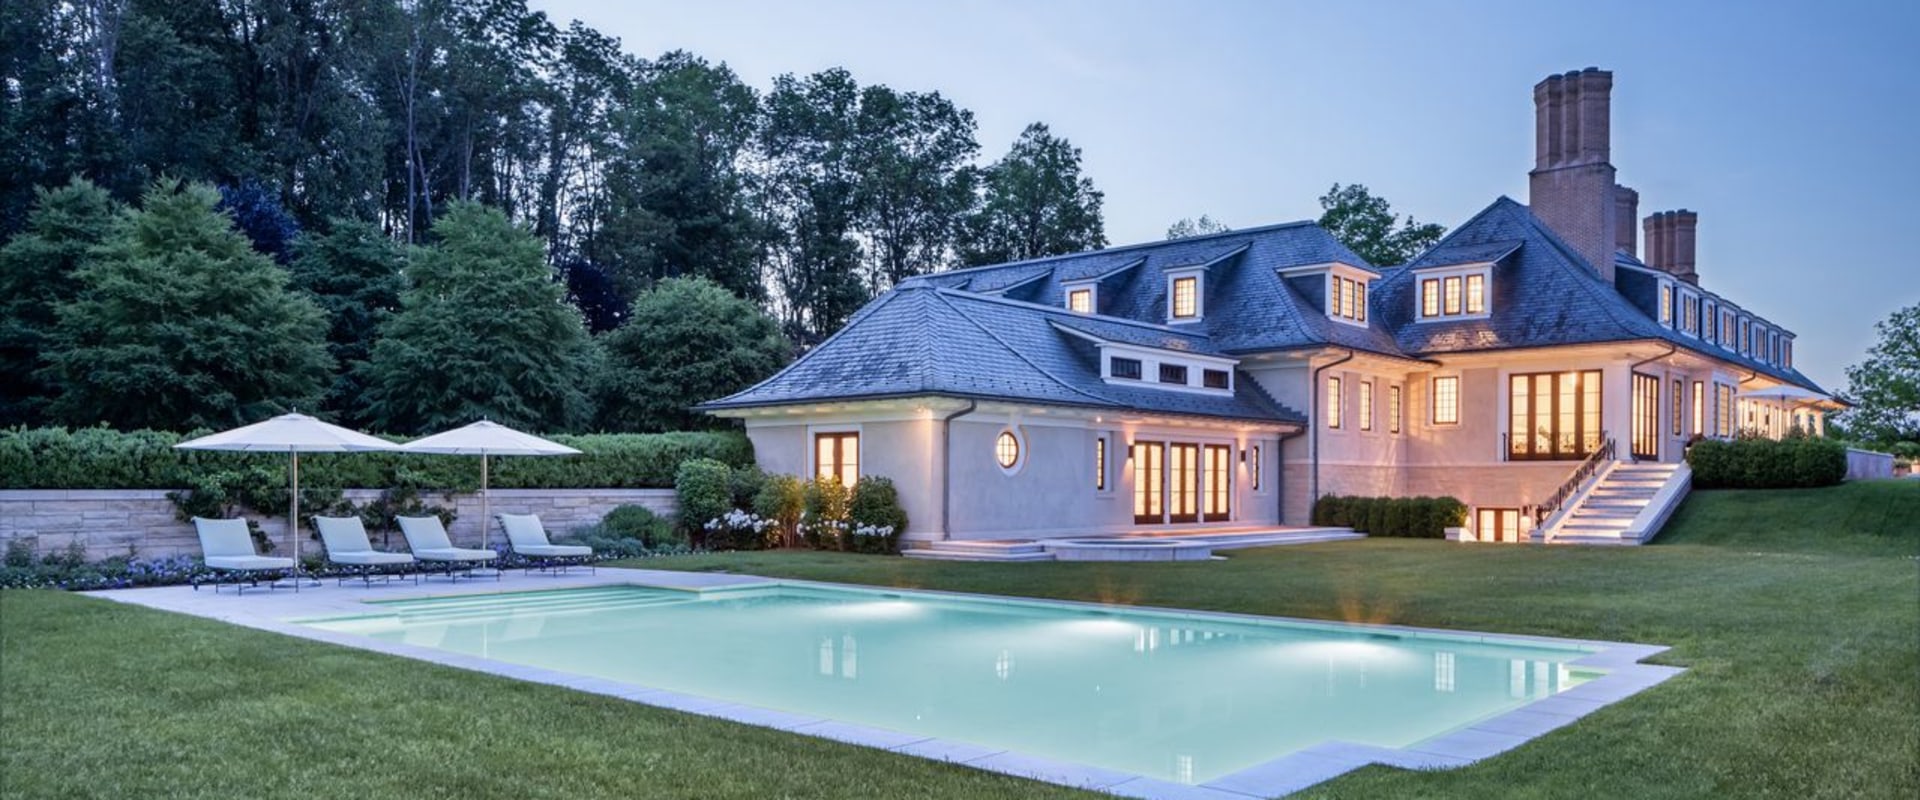 Find Your Dream Home with a Pool in Bucks County, PA